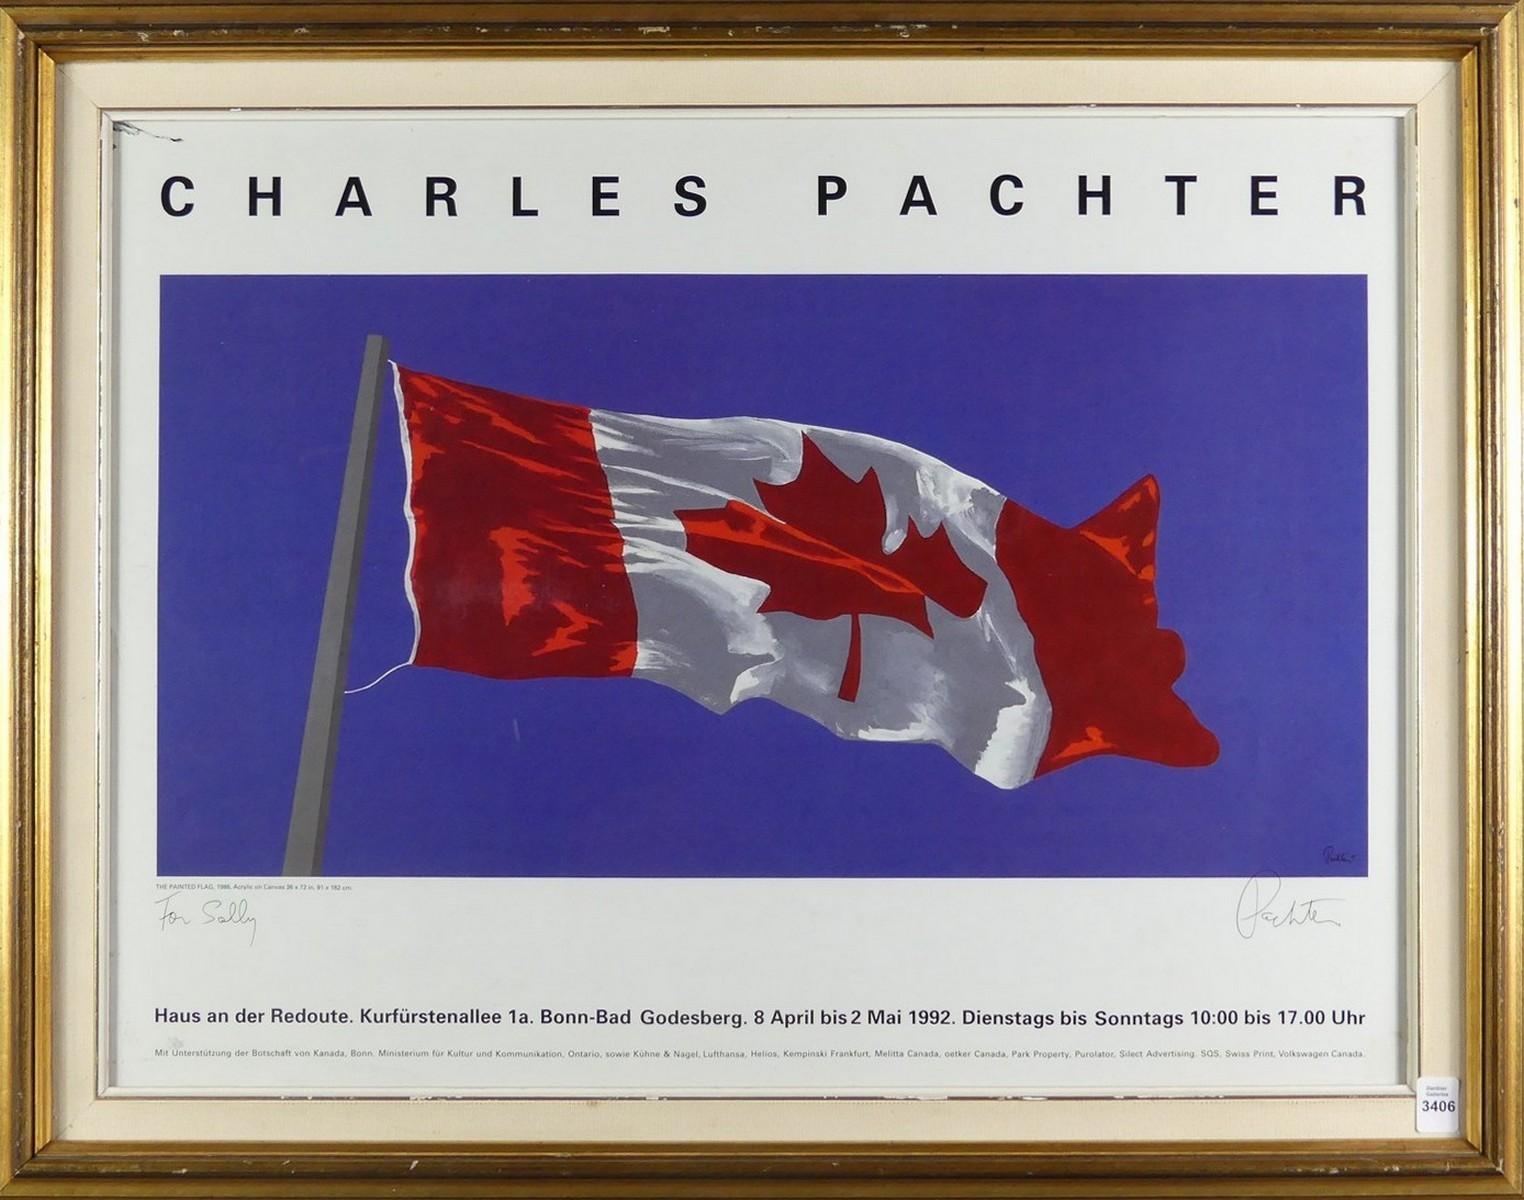 CHARLES PACHTER AUTOGRAPHED POSTER by Charles Pachter